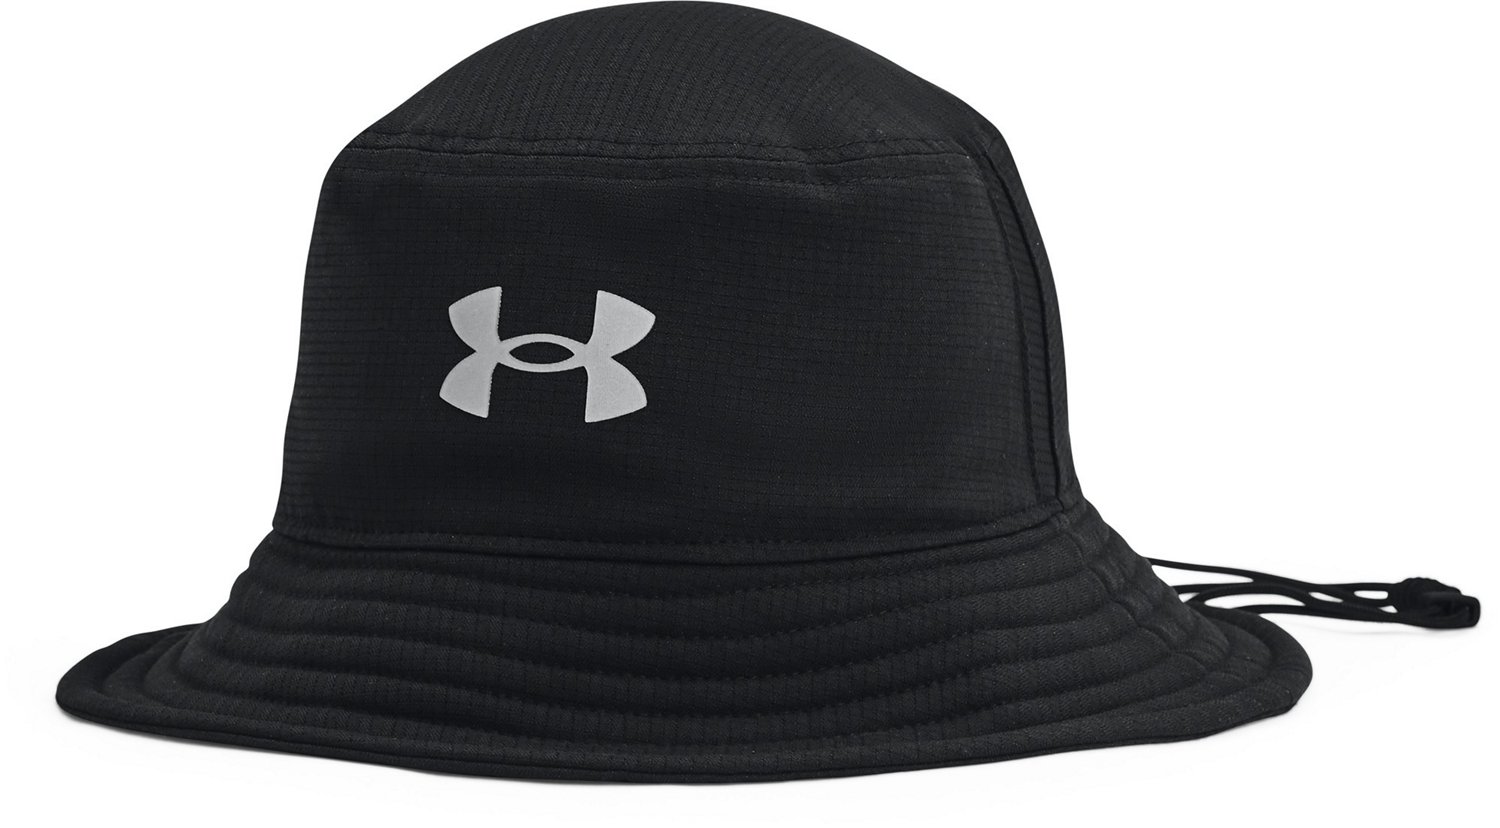 Buy Under Armour Men's Iso-chill ArmourVent Fitted Baseball Cap